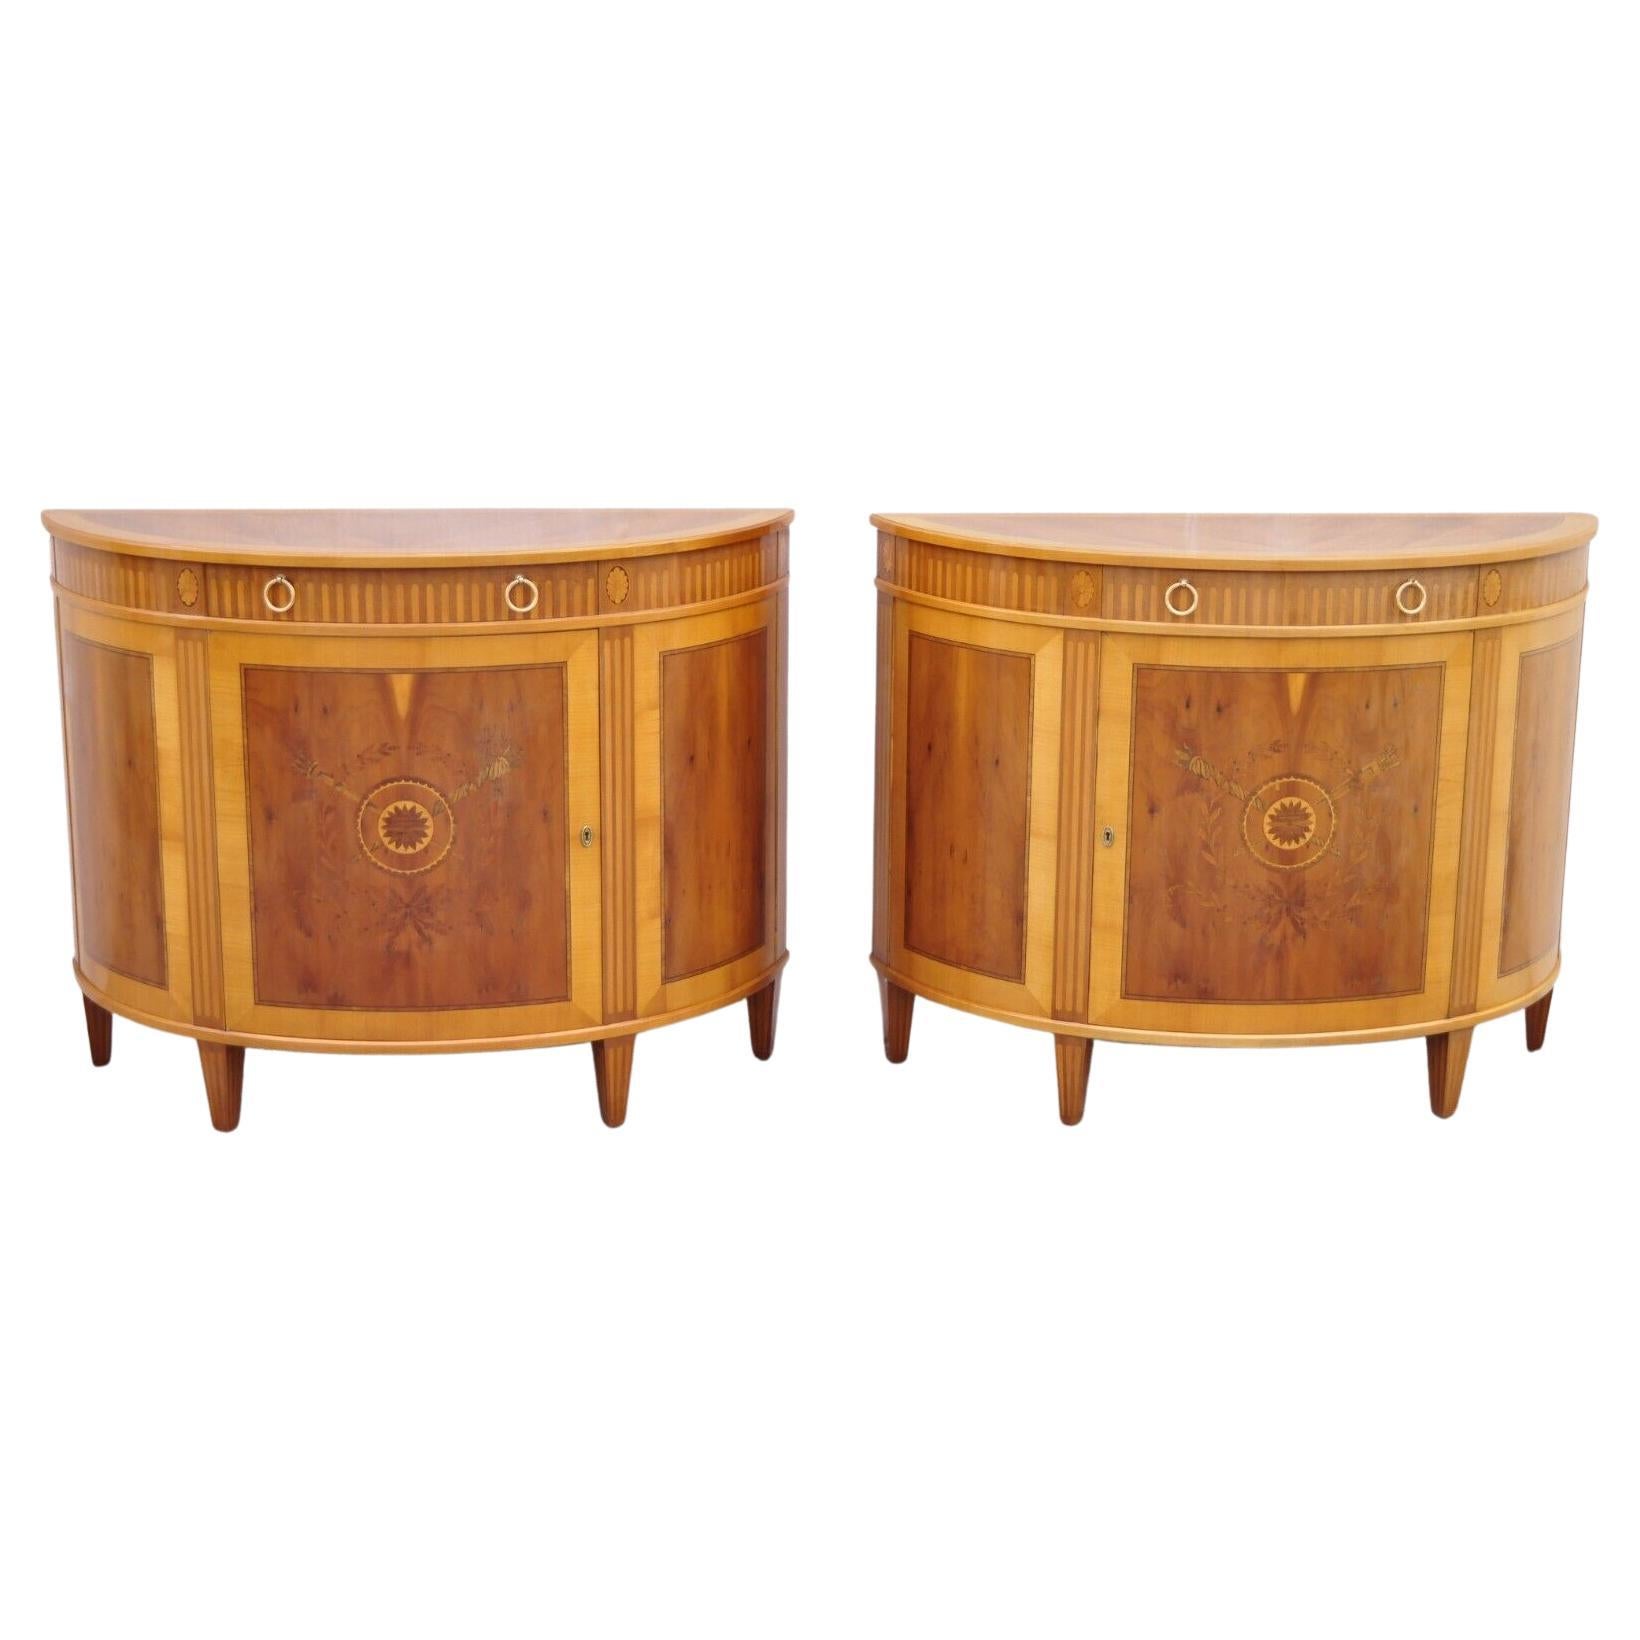 Colombo Mobili French Louis XVI Yew Wood Inlay Demilune Commode Cabinet, a Pair